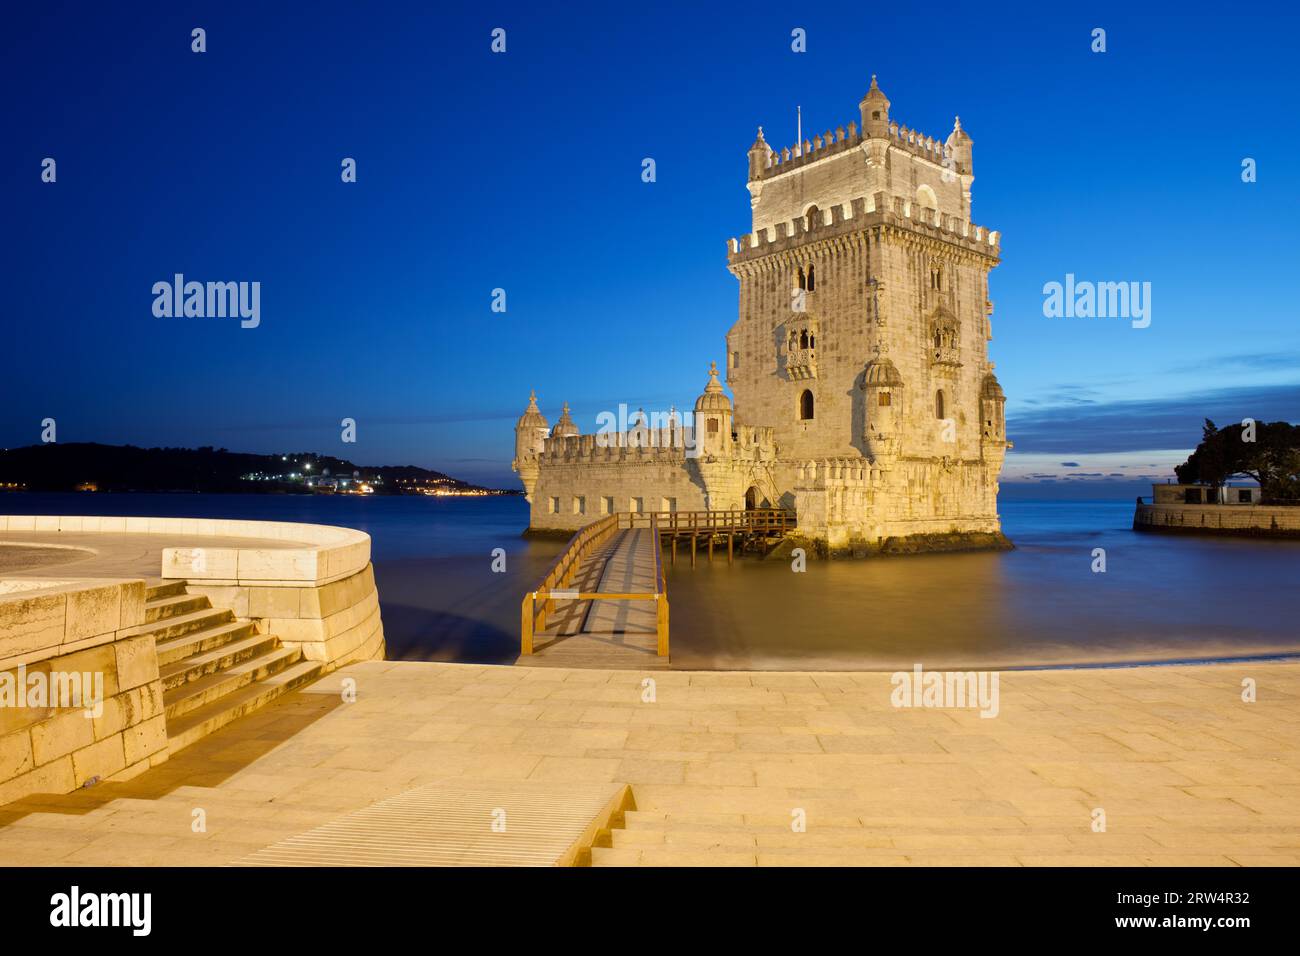 Belem Tower at night in Lisbon, Portugal, promenade along Tagus River Stock Photo